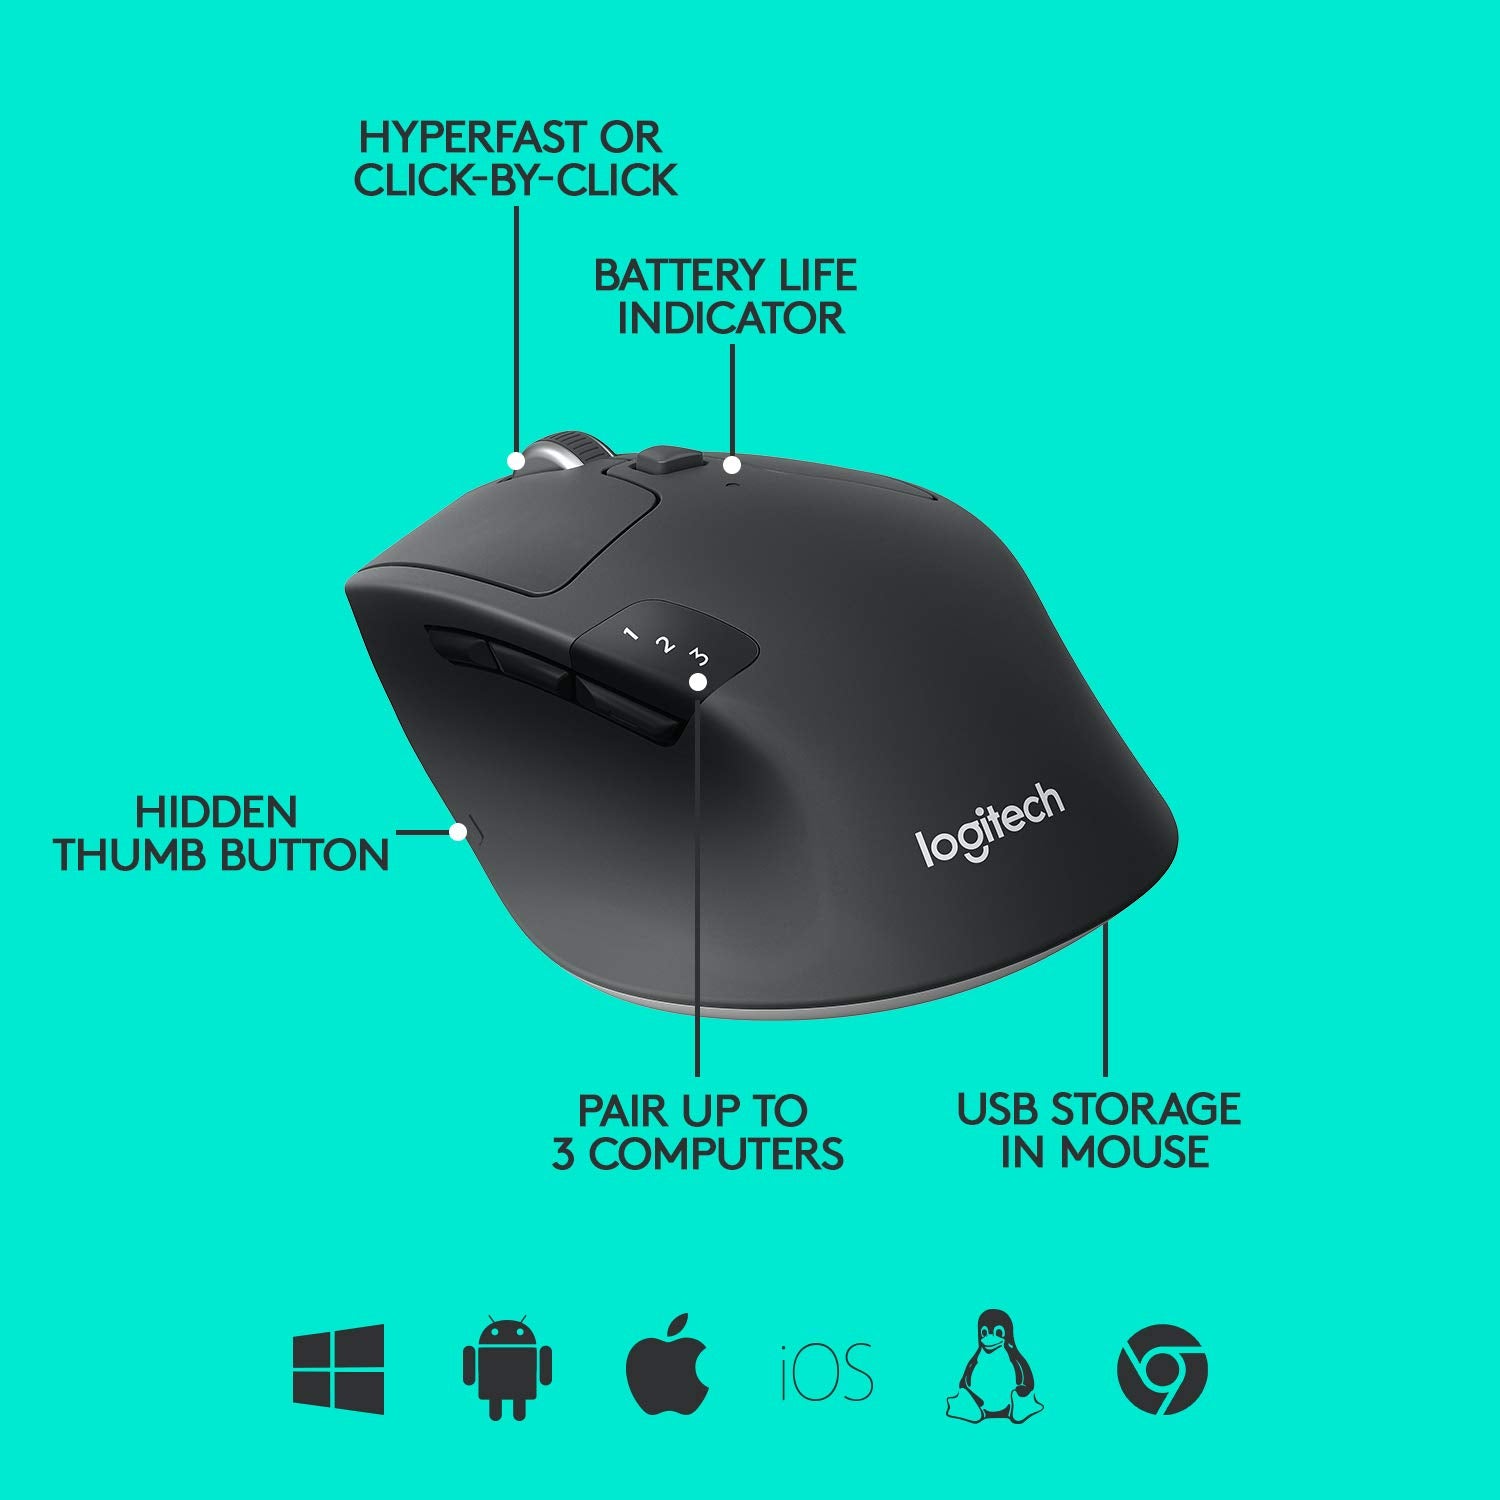 Logitech M720 Triathlon Multi-Device Wireless Mouse, Bluetooth, USB Unifying Receiver, 1000 DPI, 6 Programmable Buttons, 2-Year Battery, Compatible with Laptop, PC, Mac, iPadOS - Grey